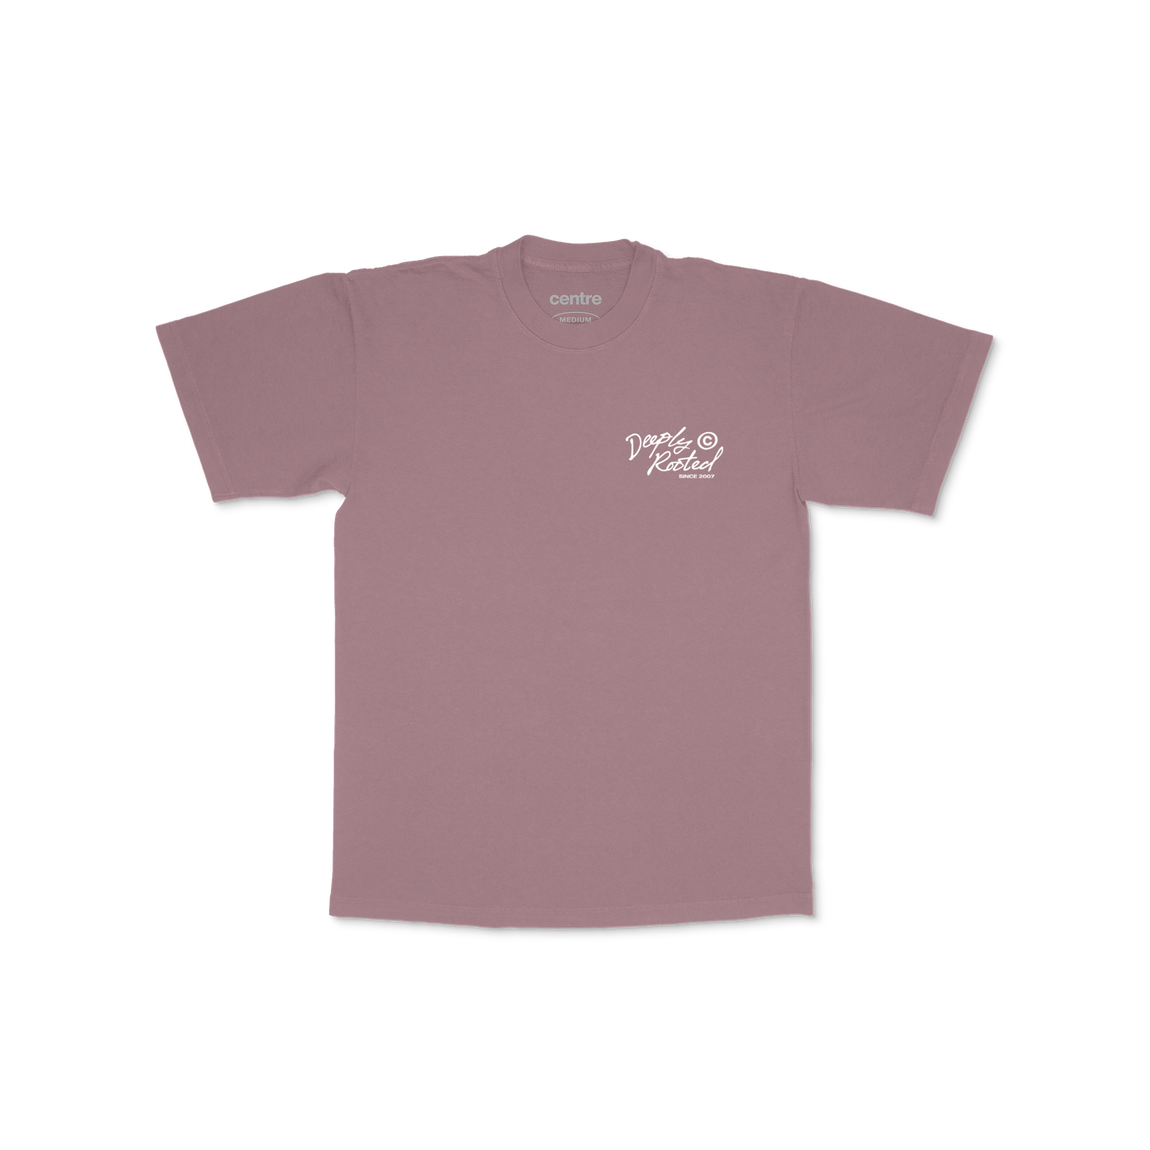 Centre Deeply Rooted Tee (Mauve) - Centre Deeply Rooted Tee (Mauve) - 